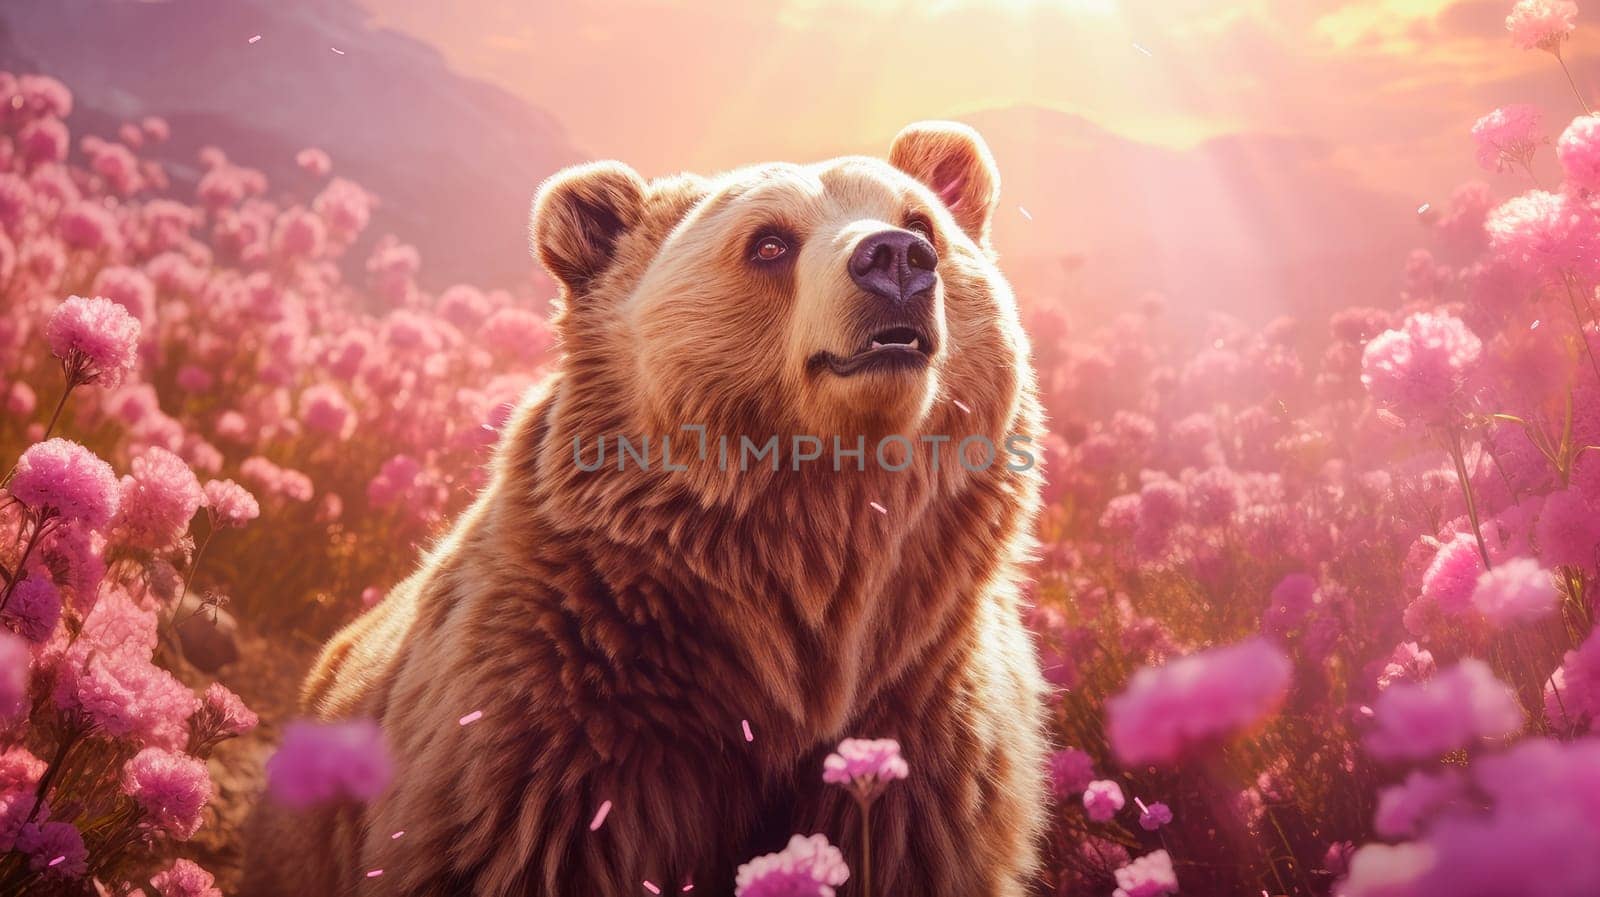 Cute, beautiful bear in a field with flowers in nature, in sunny pink rays. Environmental protection, nature pollution problem, wild animals. Advertising for a travel agency, pet store, veterinary clinic, phone screensaver, beautiful pictures, puzzle